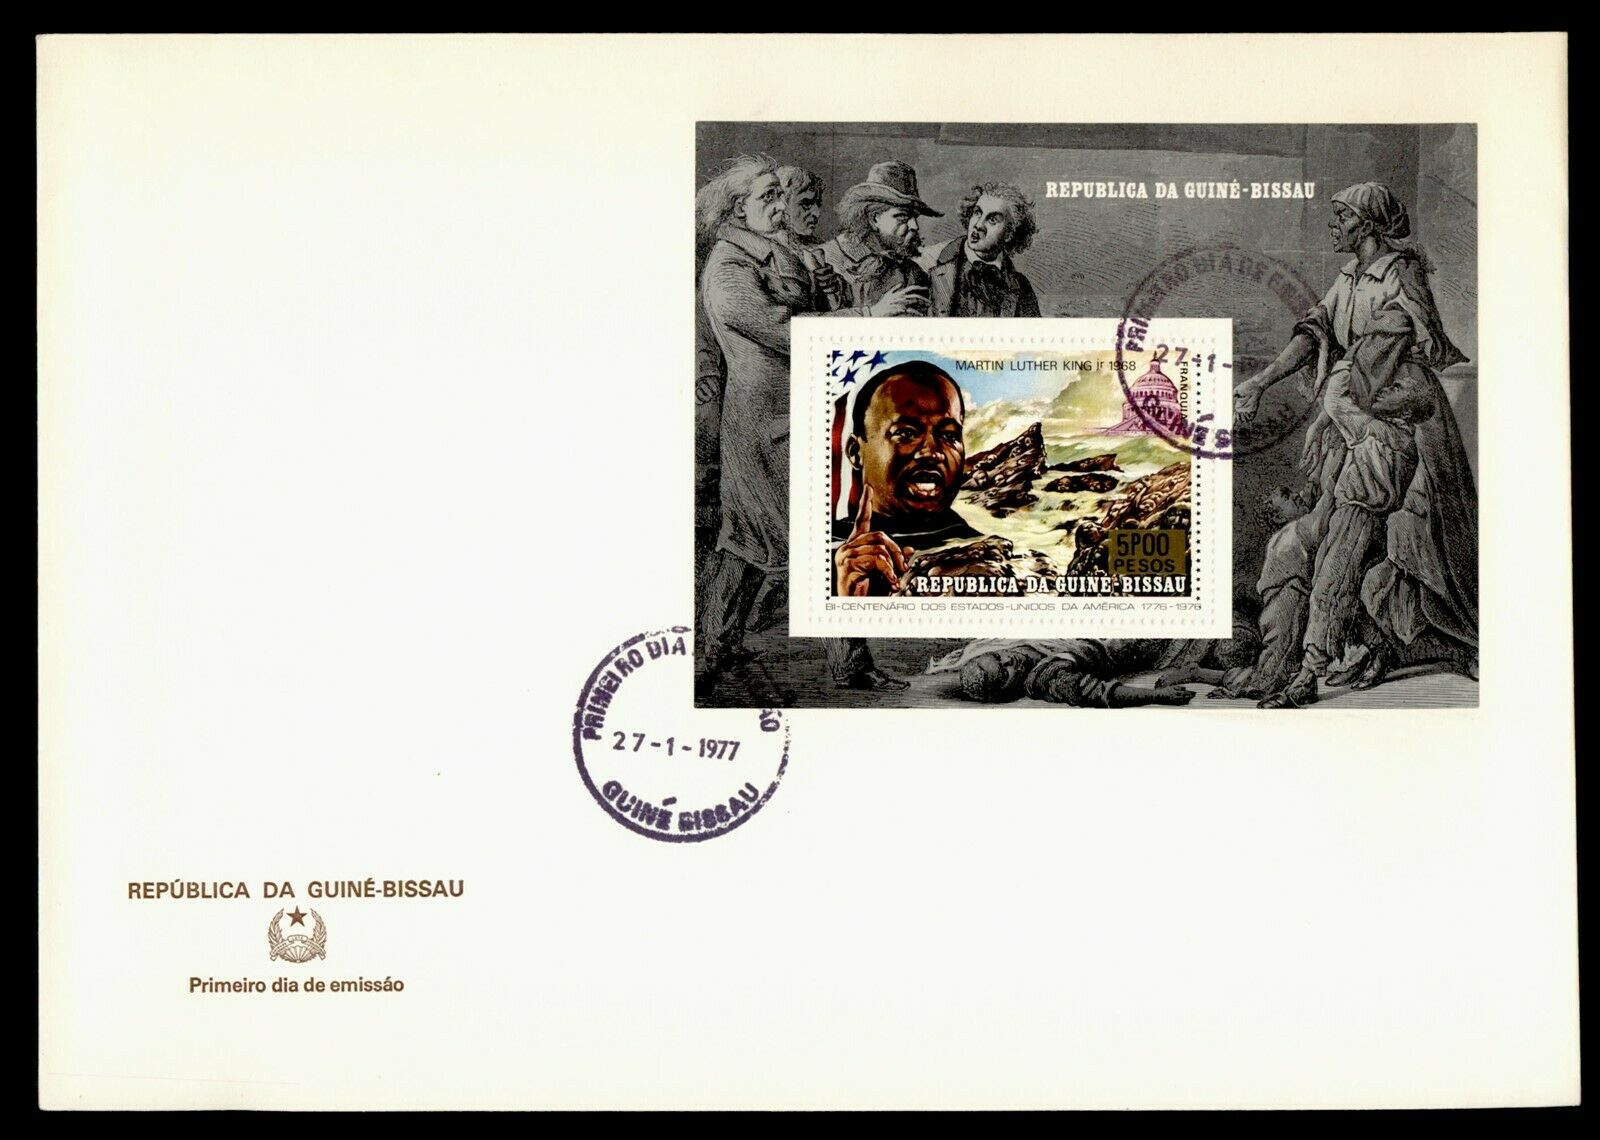 Dr Who 1977 Guinea Bissau Fdc Martin Luther King Jr S/s  Lg22066